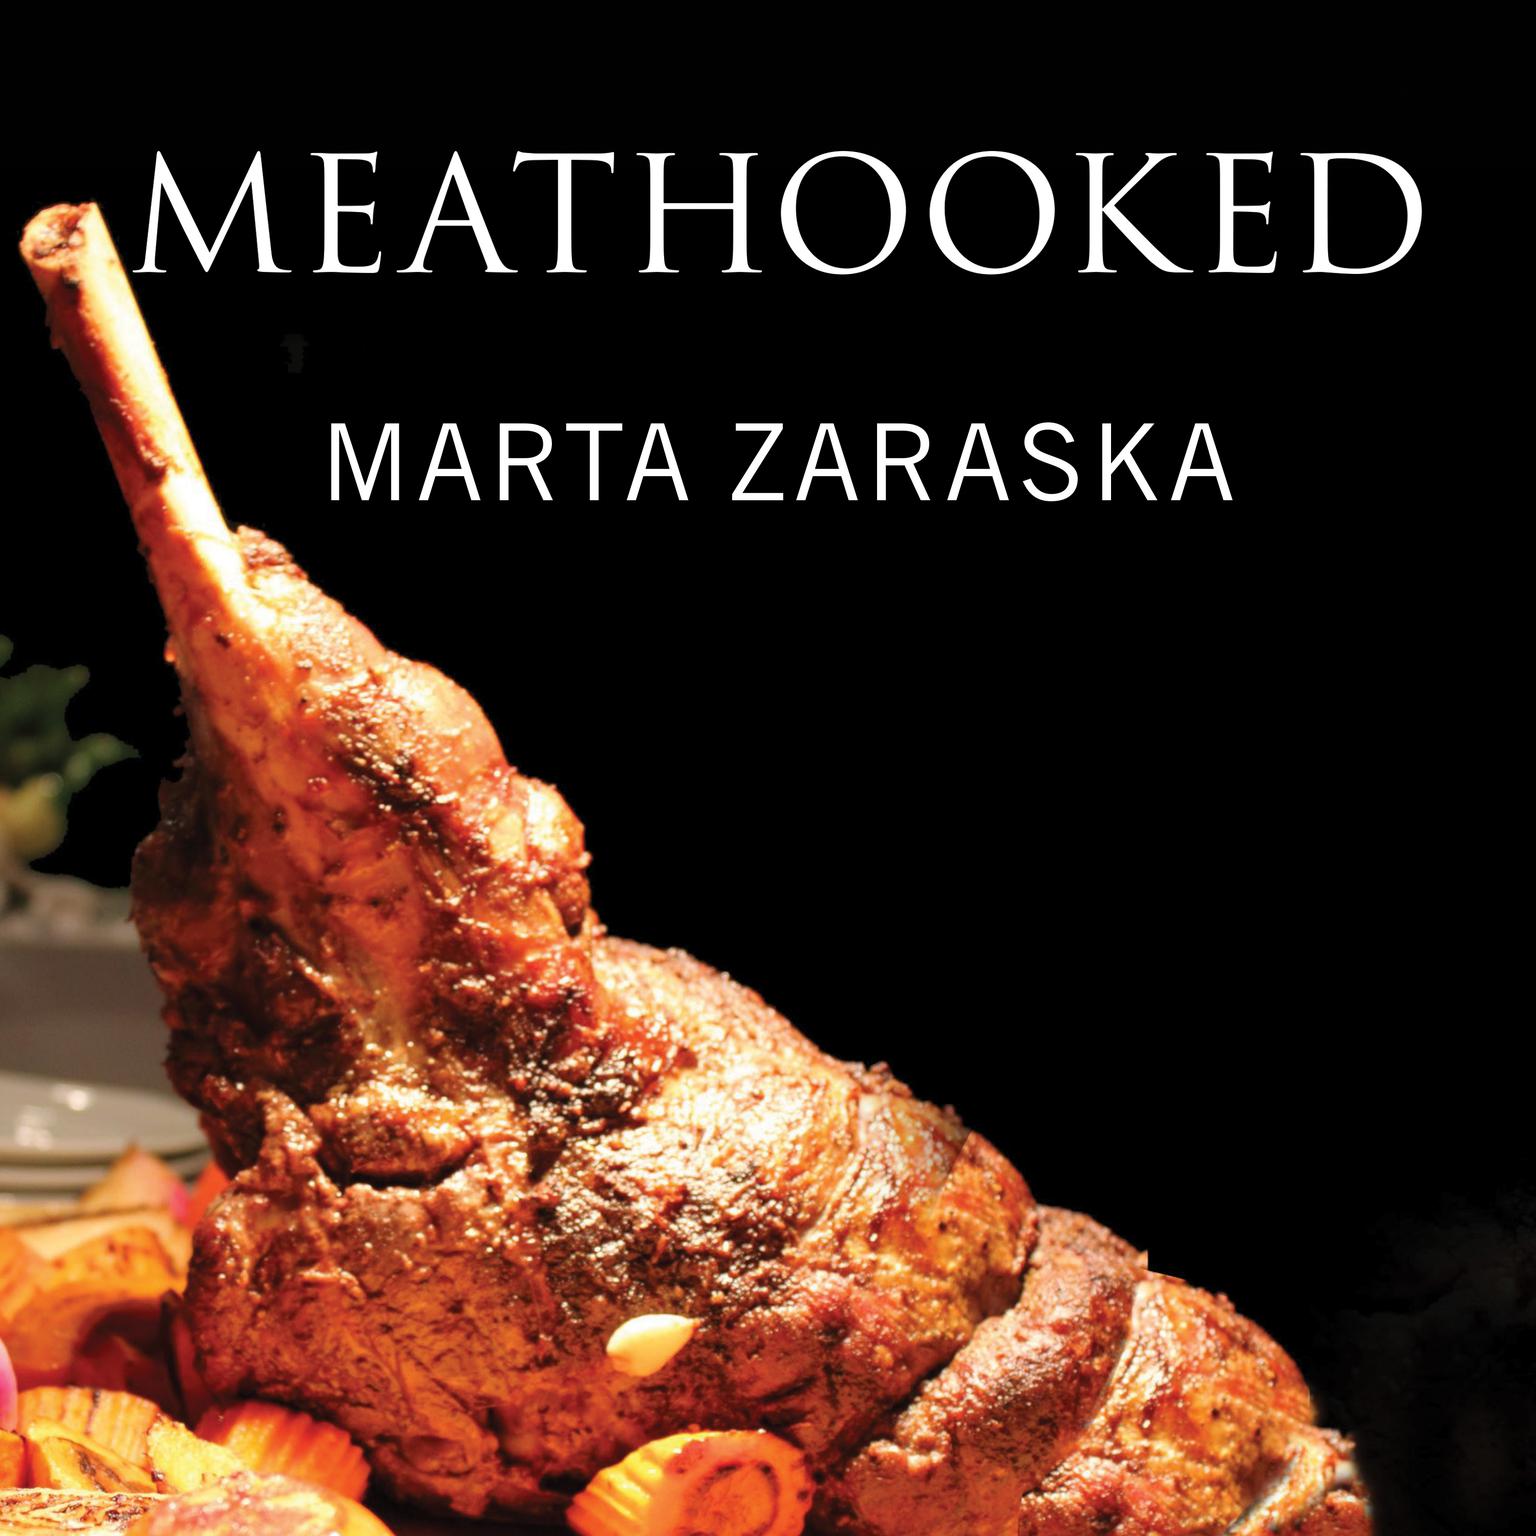 Meathooked: The History and Science of Our 2.5-Million-Year Obsession with Meat Audiobook, by Marta Zaraska